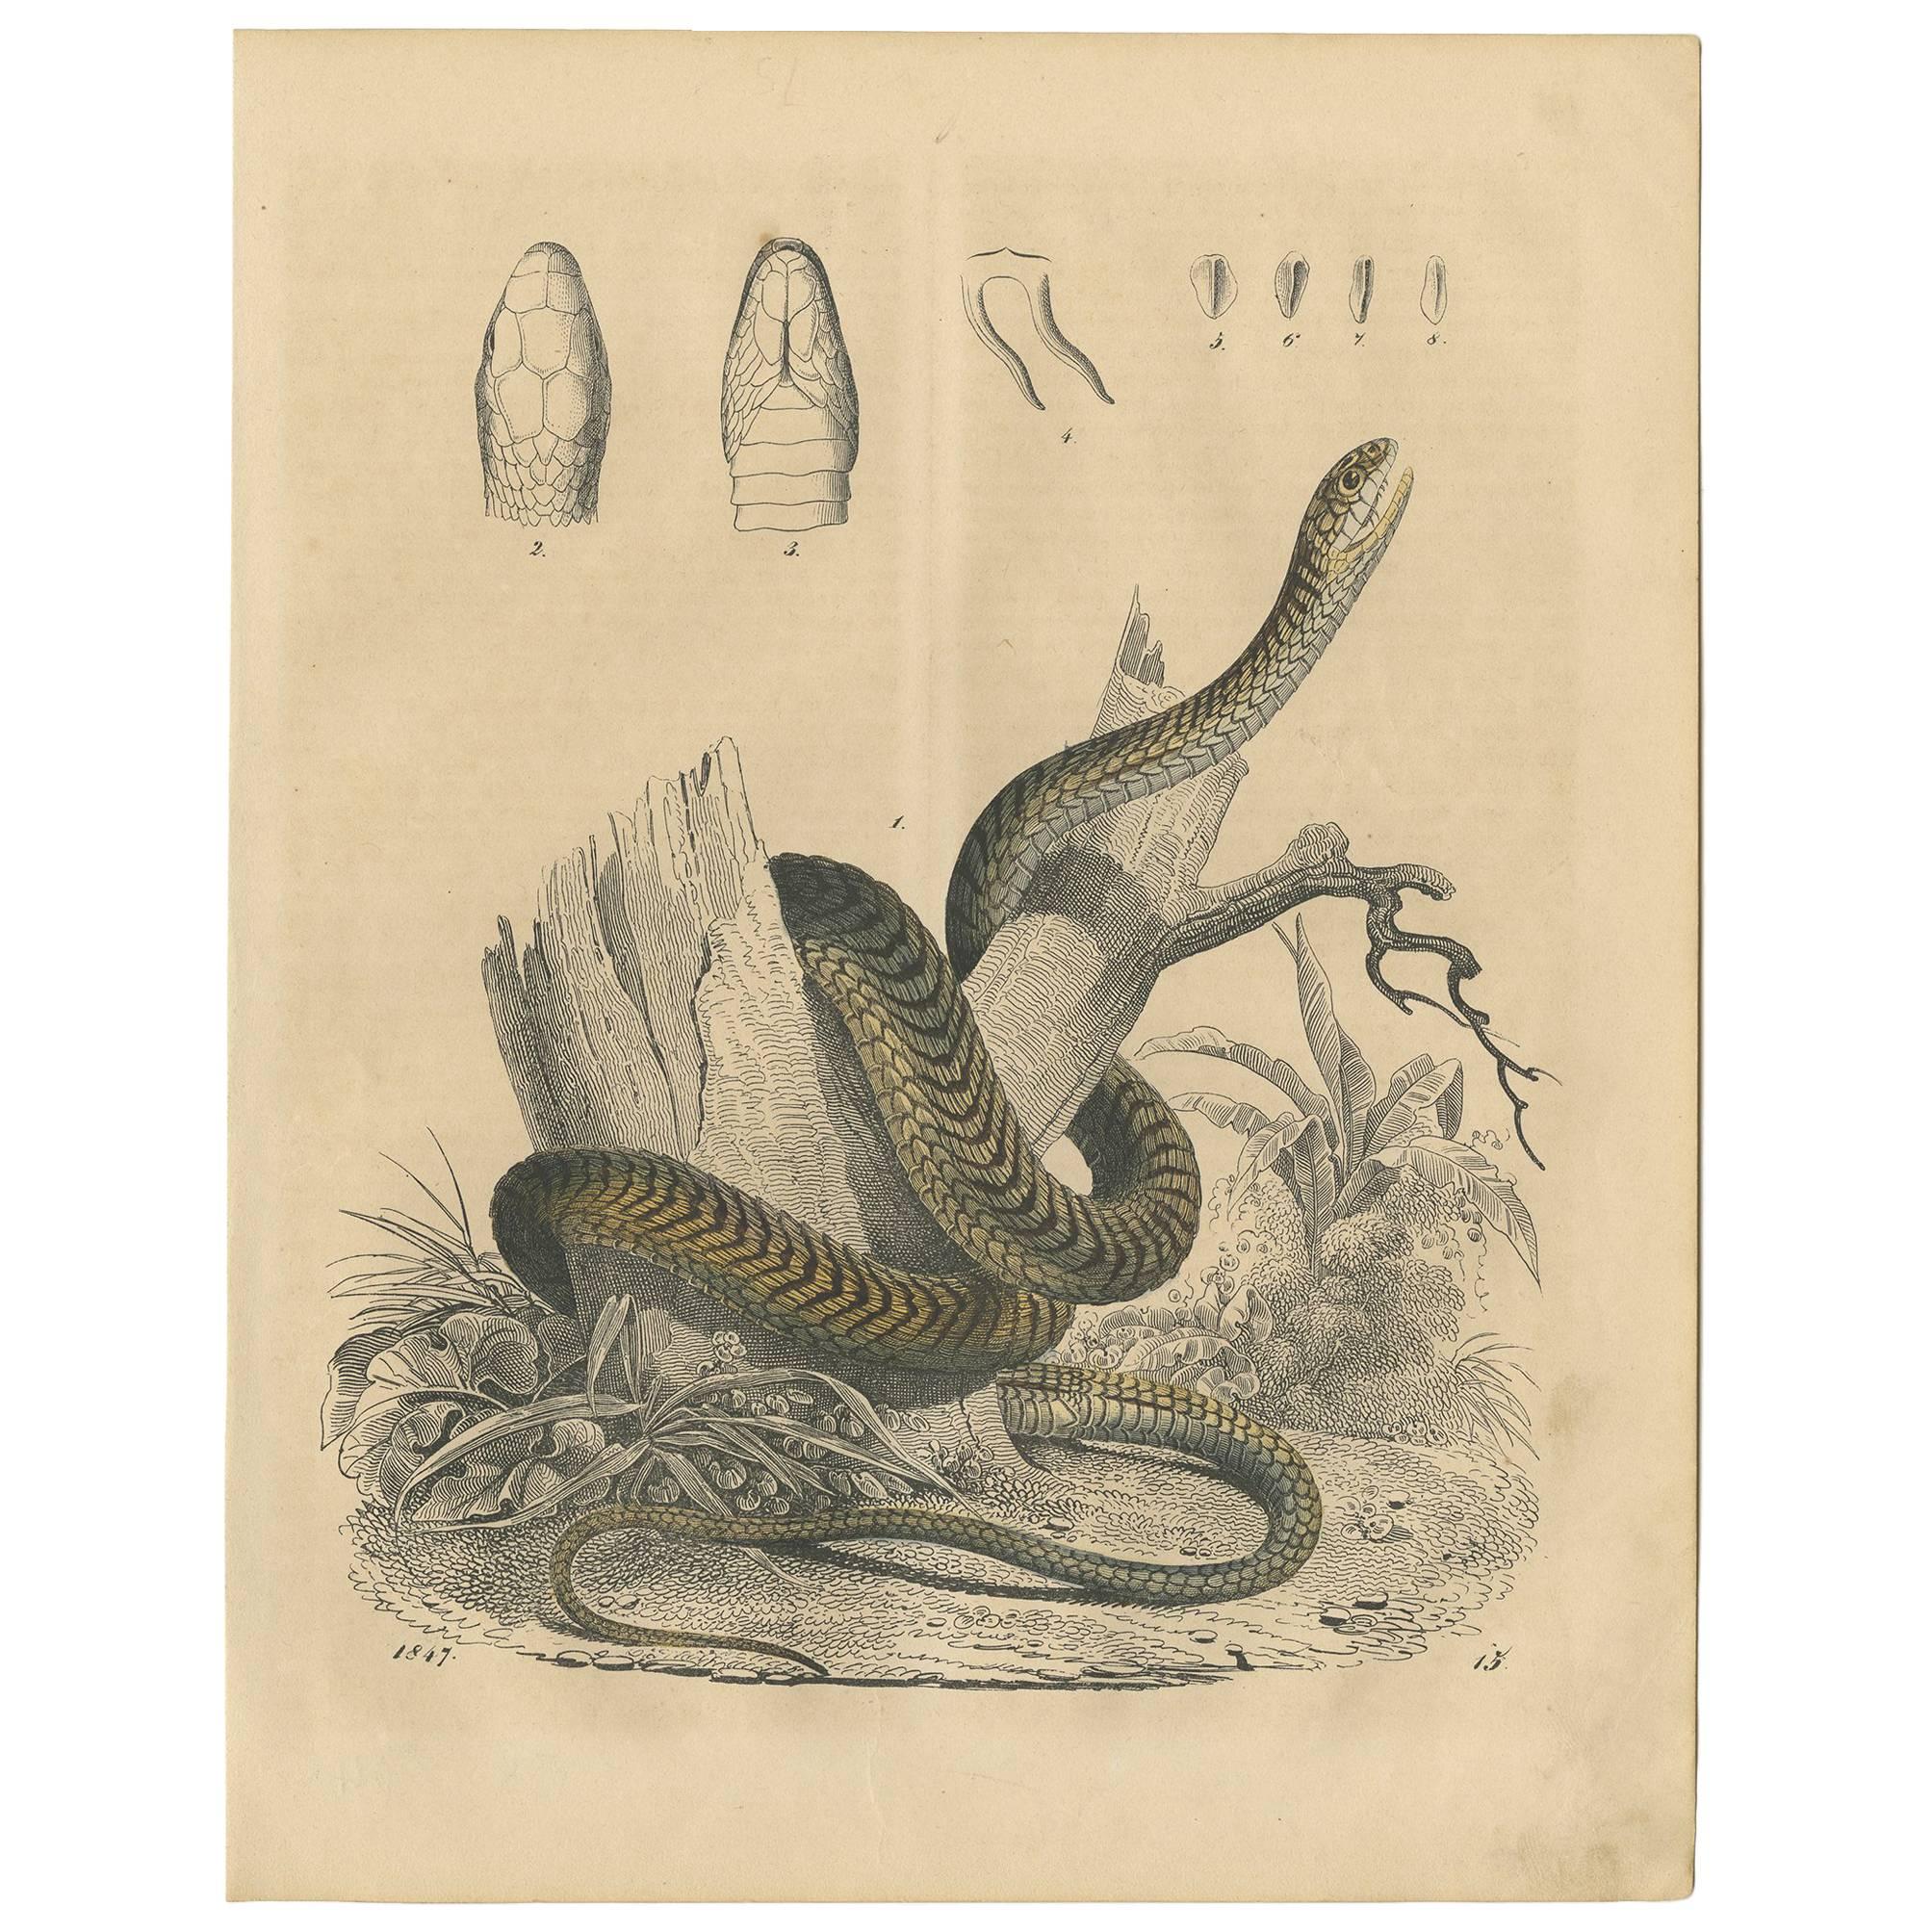 Antique Animal Print of a Snake by C. Hoffmann, 1847